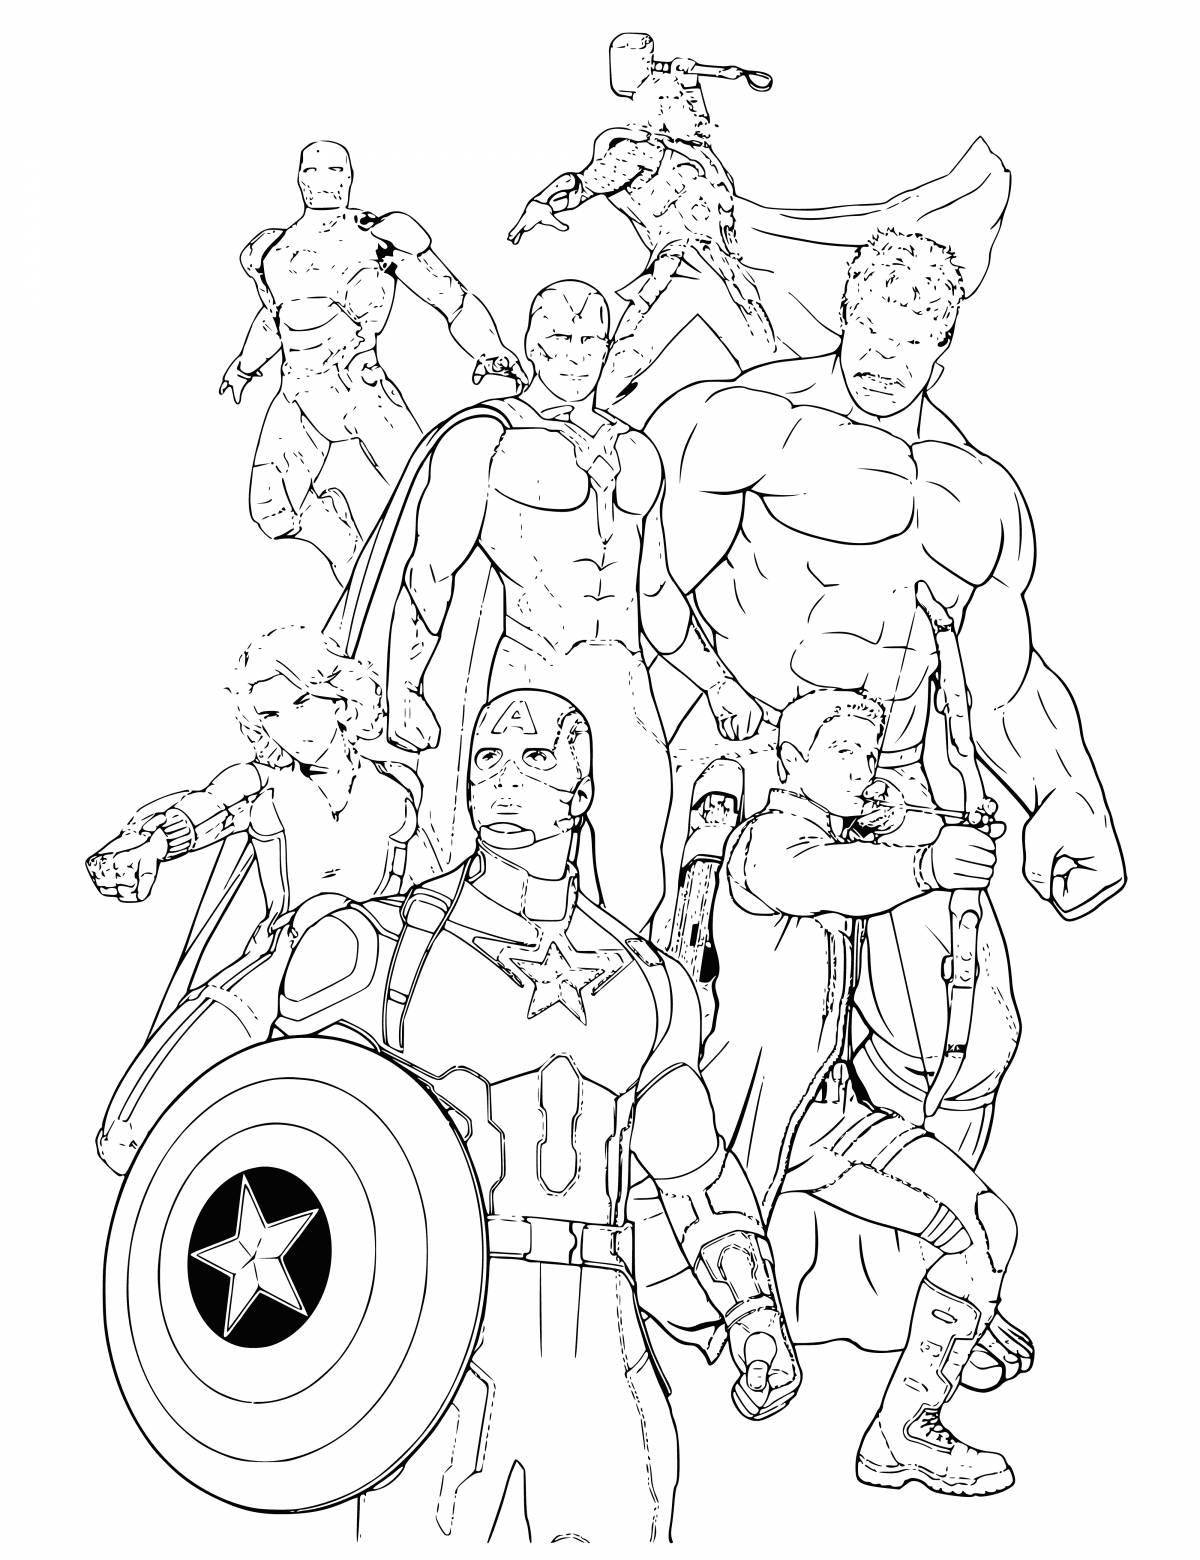 Marvel superheroes amazing coloring pages